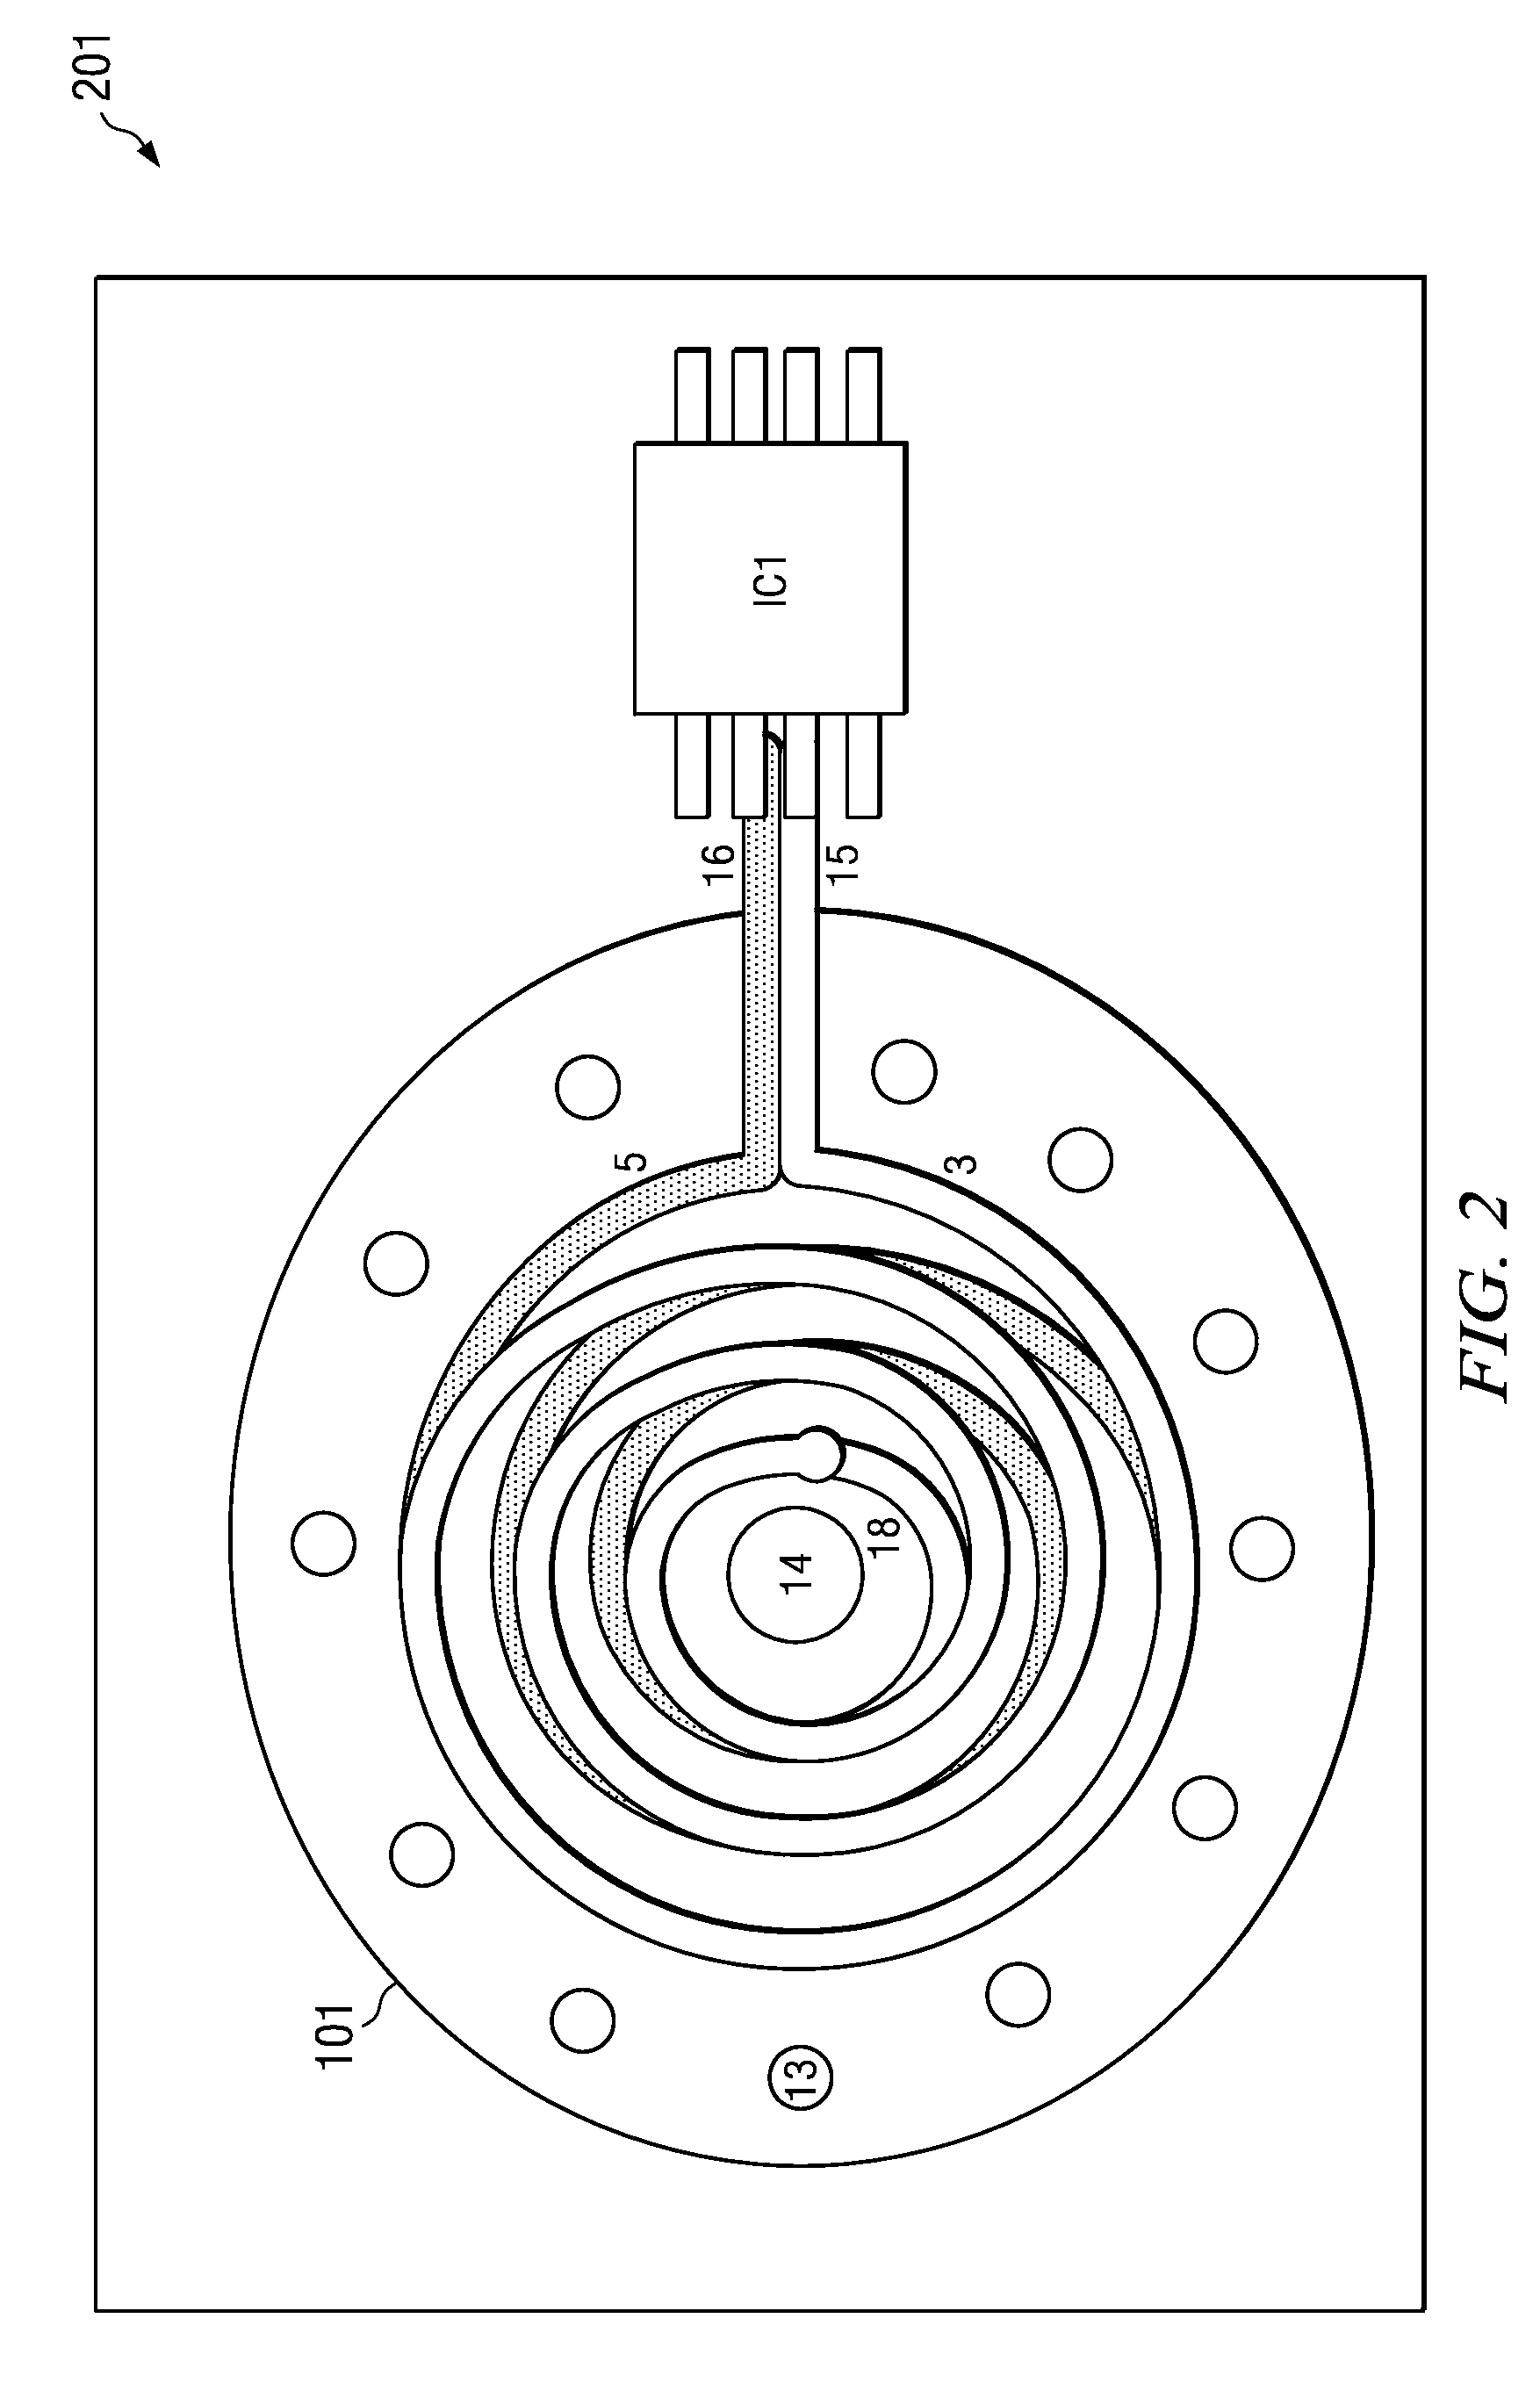 Method of constructing inductors and transformers